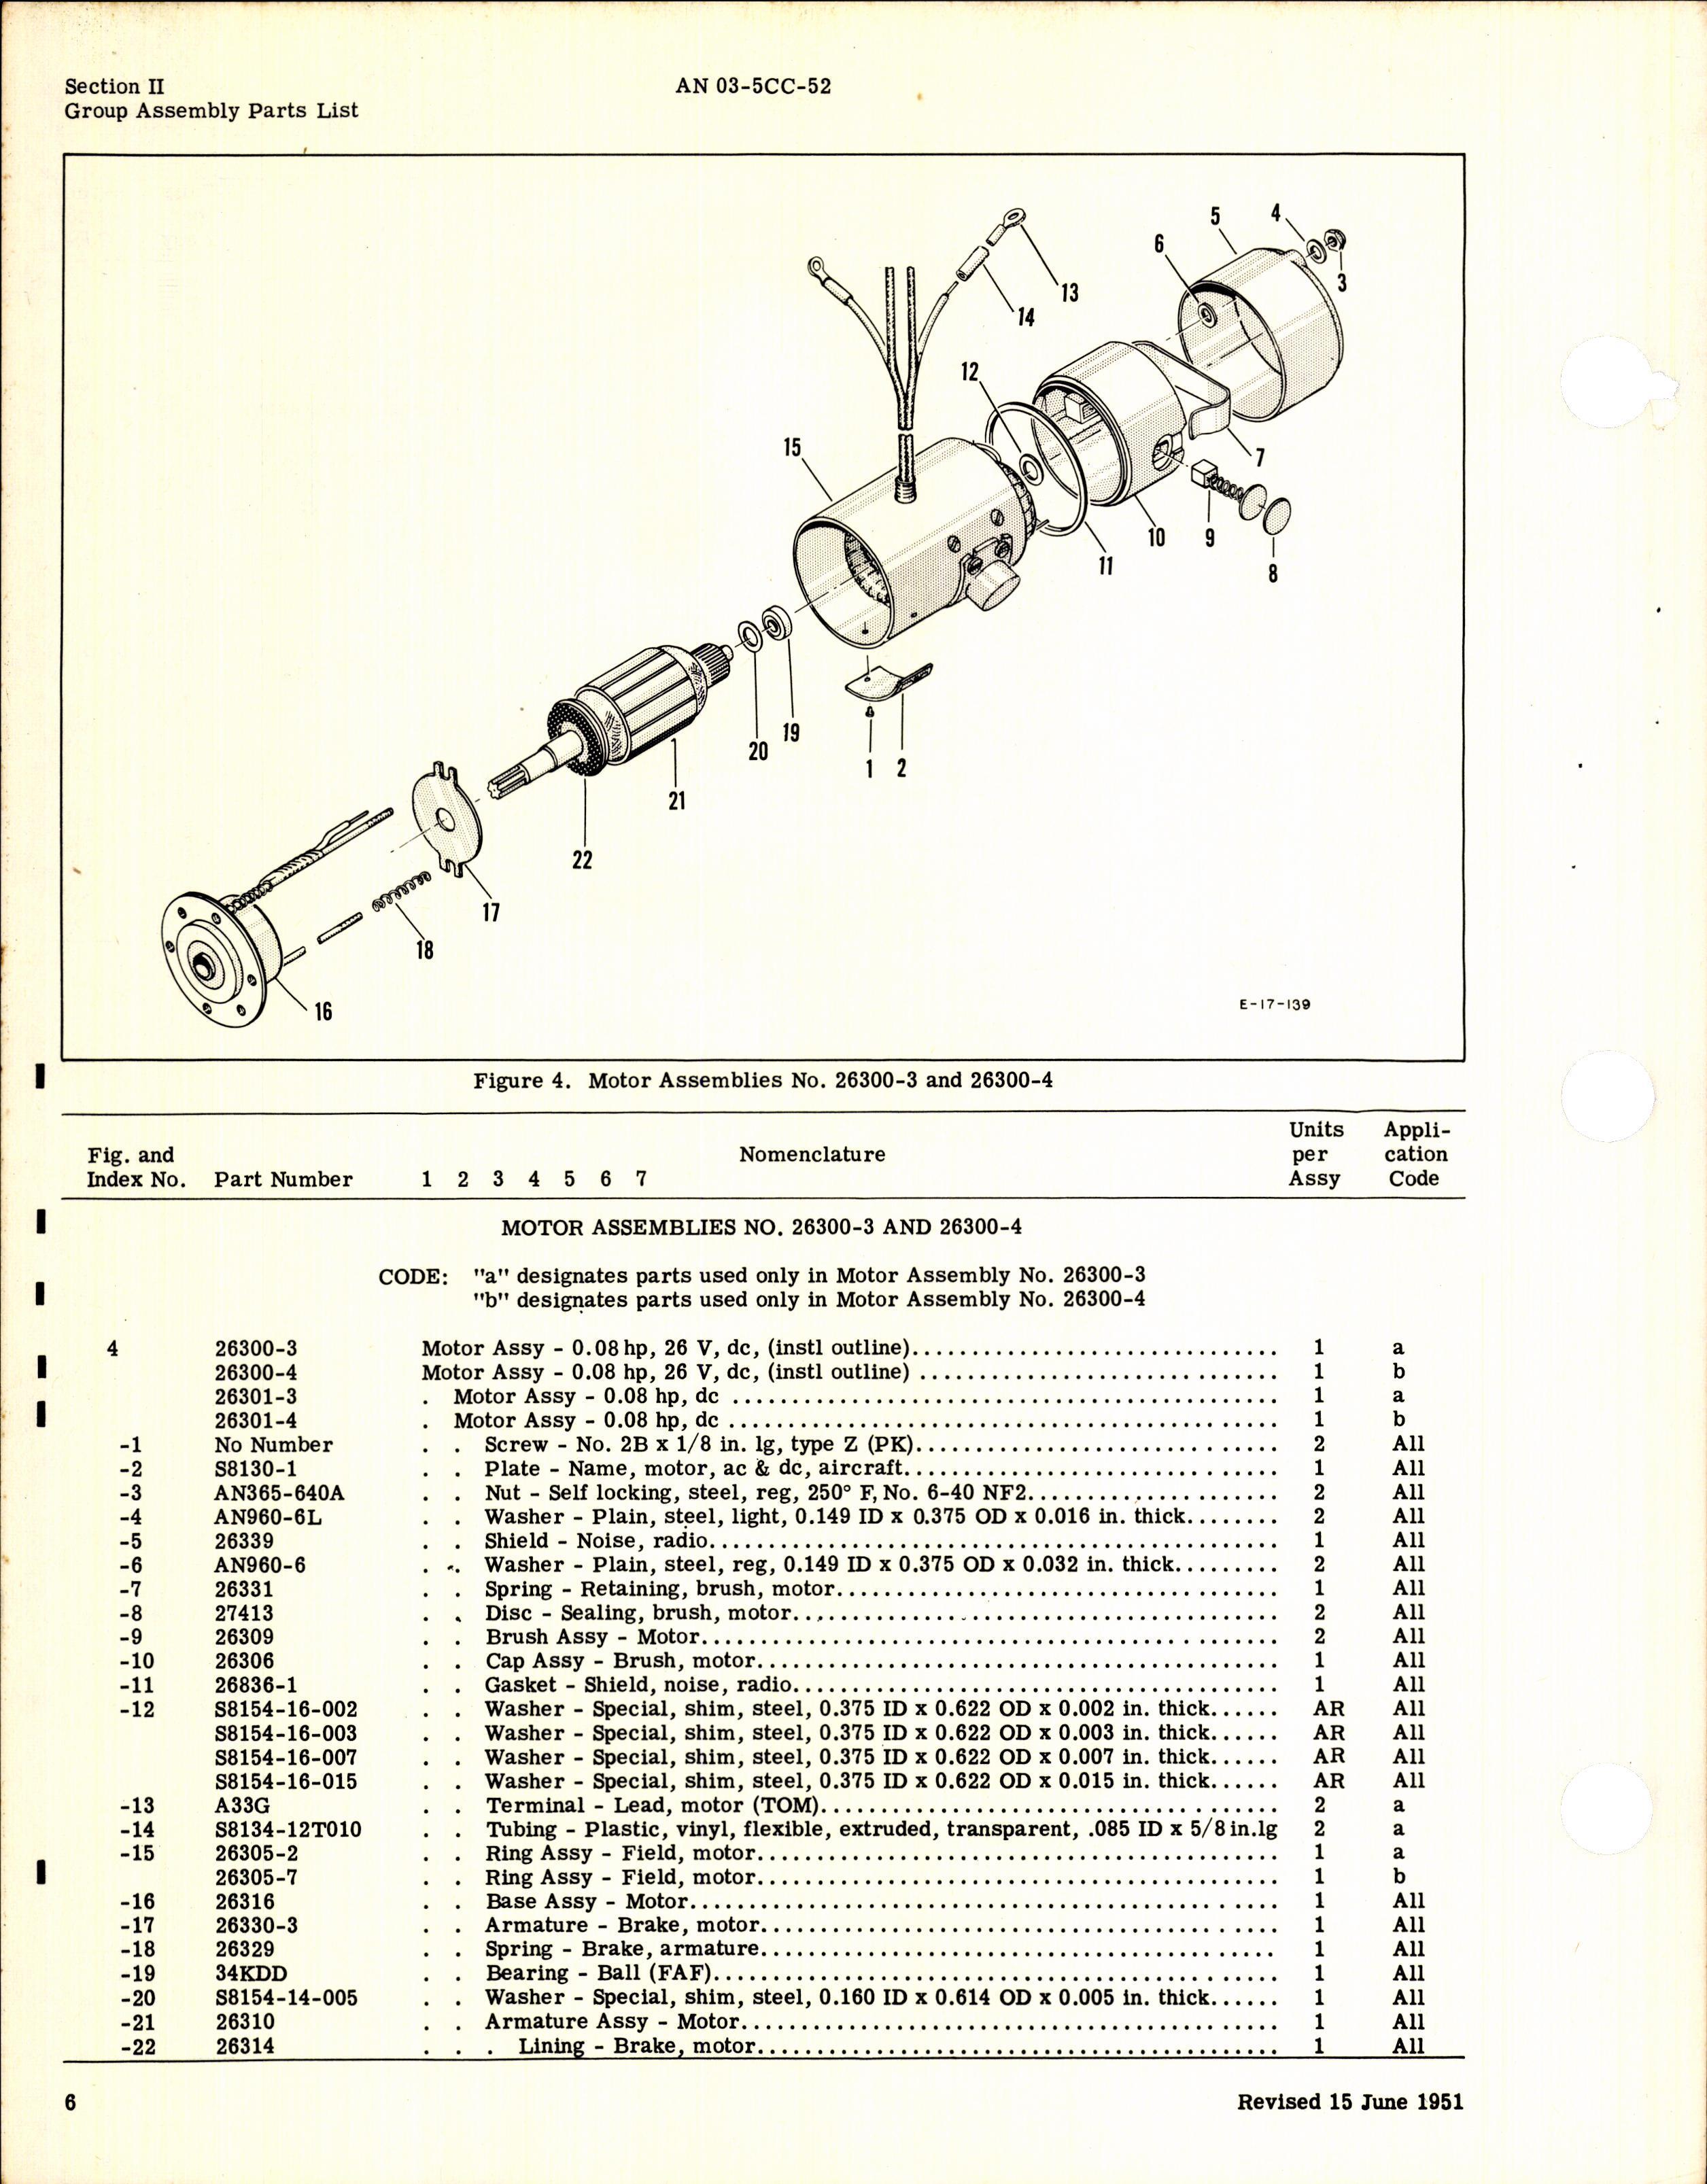 Sample page 6 from AirCorps Library document: Parts Catalog for Airesearch Electric Motors